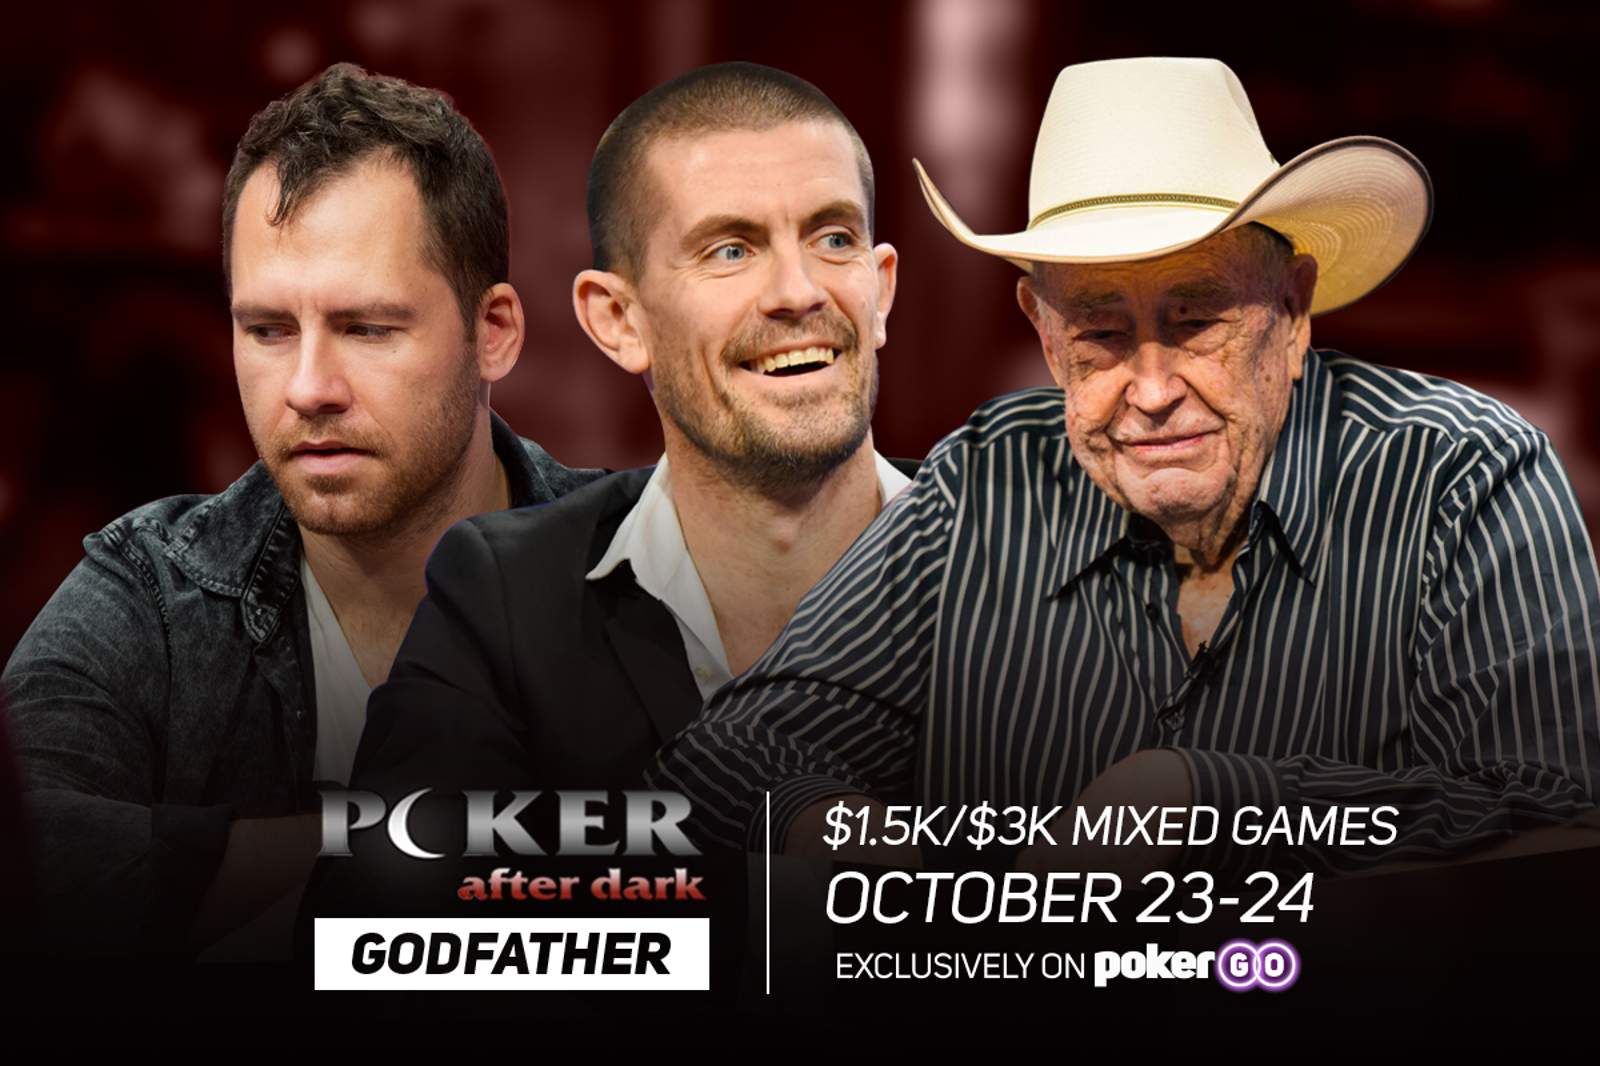 Doyle Brunson Brings Mixed Games to "Poker After Dark"